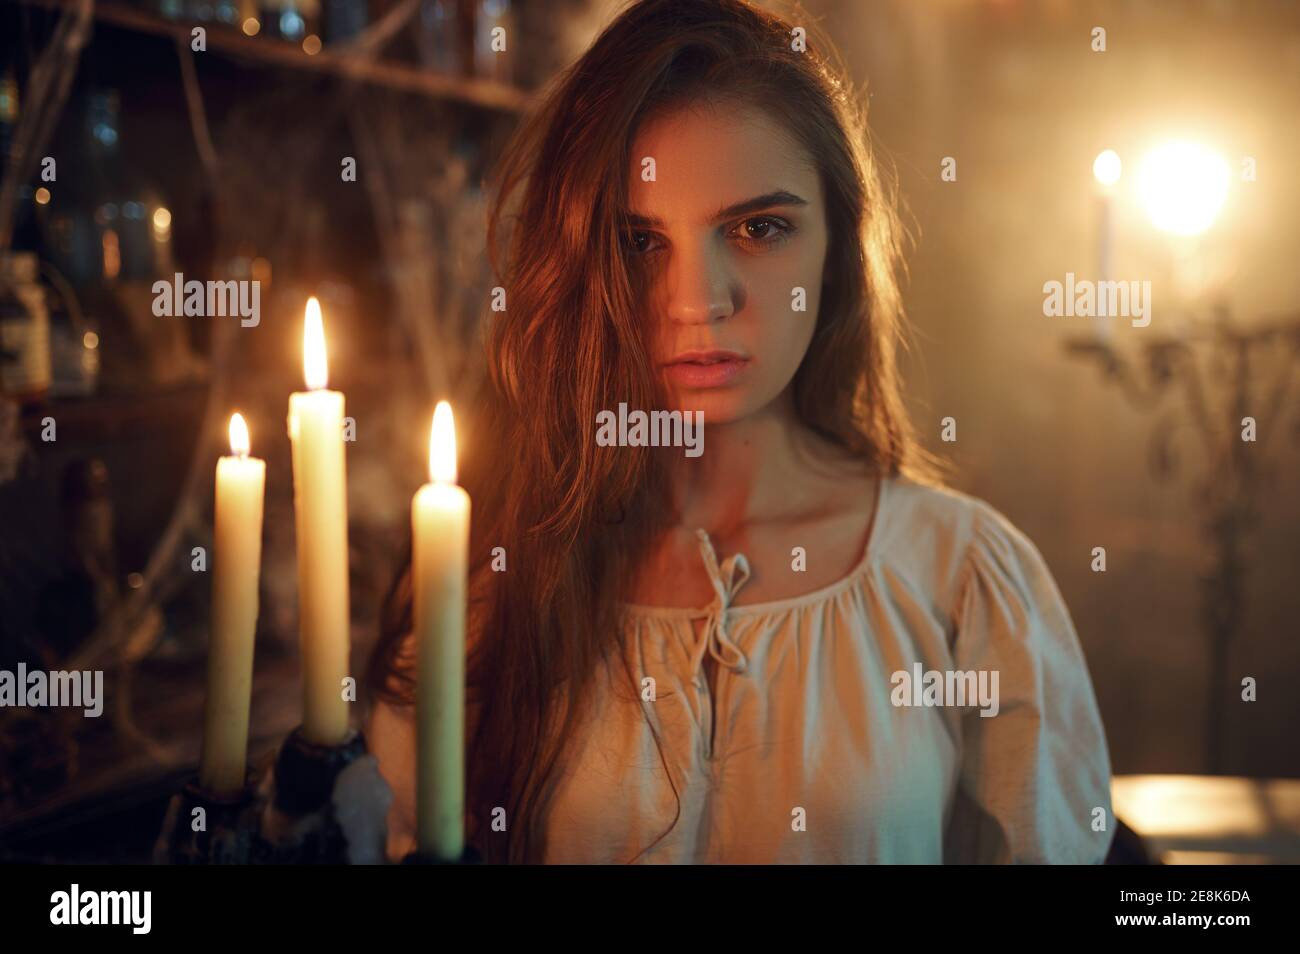 Crazy demonic woman with candle choosing potions Stock Photo